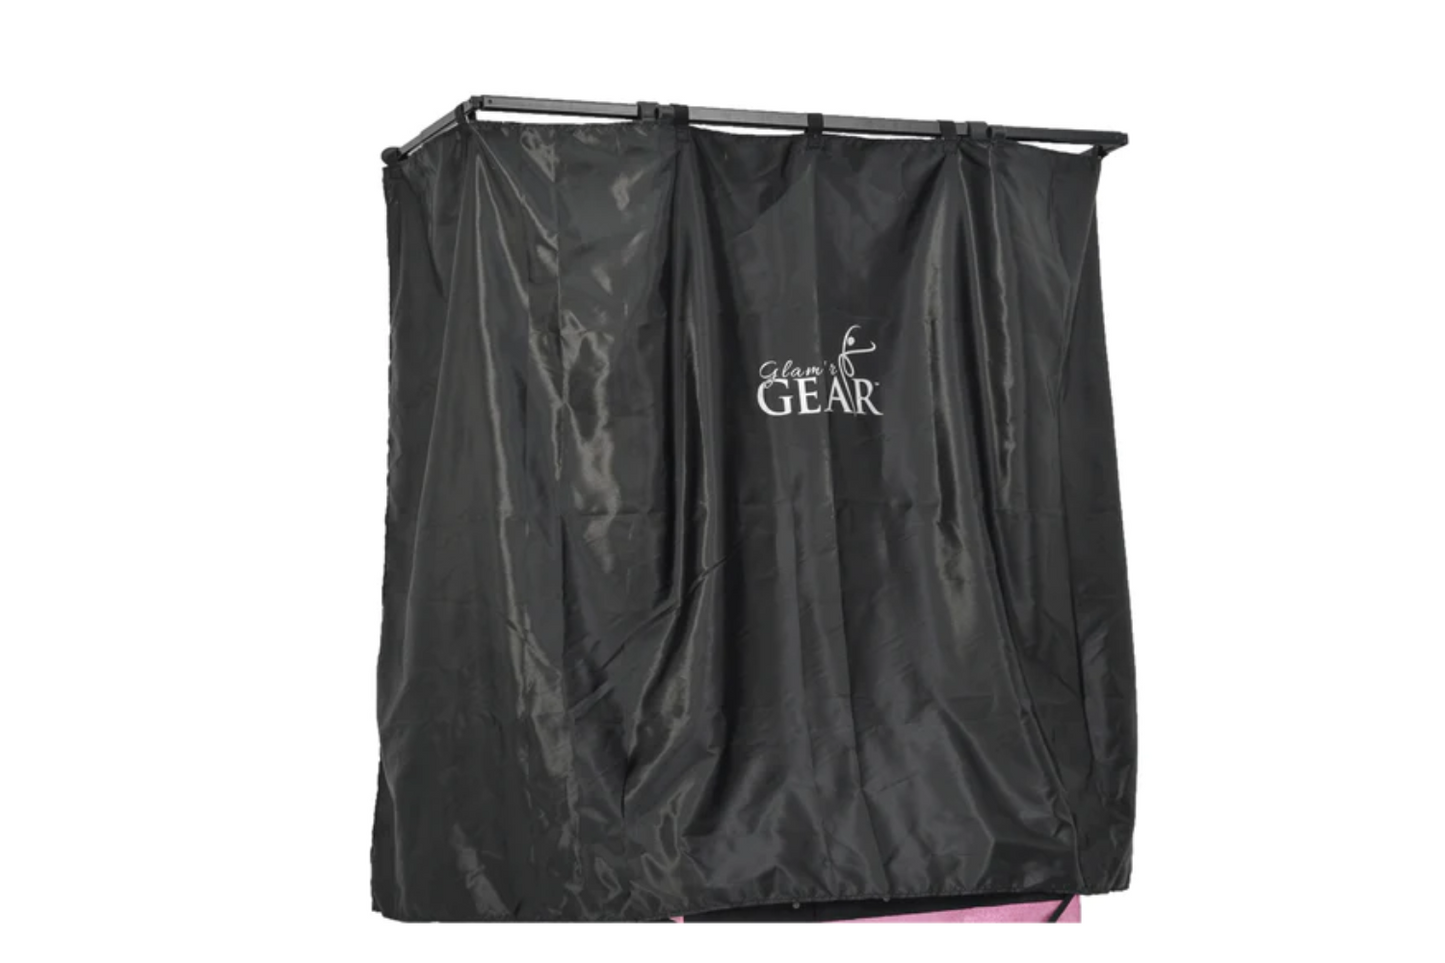 GLAM'R GEAR uHIDE PRIVACY CURTAIN LARGE